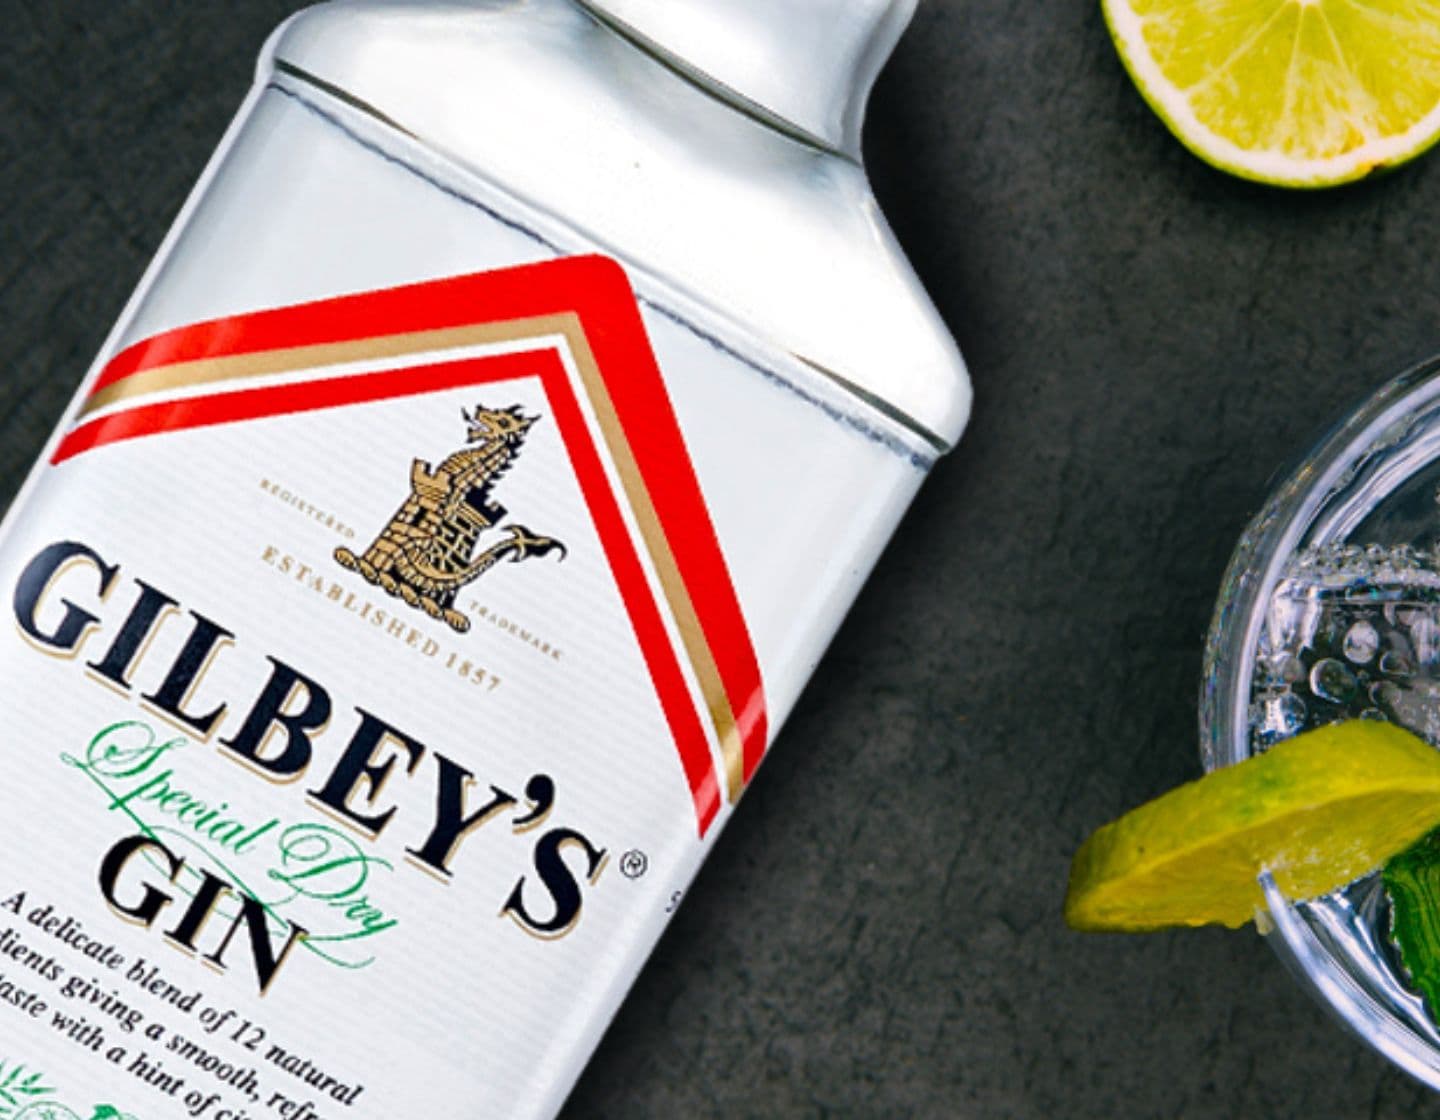 Gilbey’s Gin bottle  